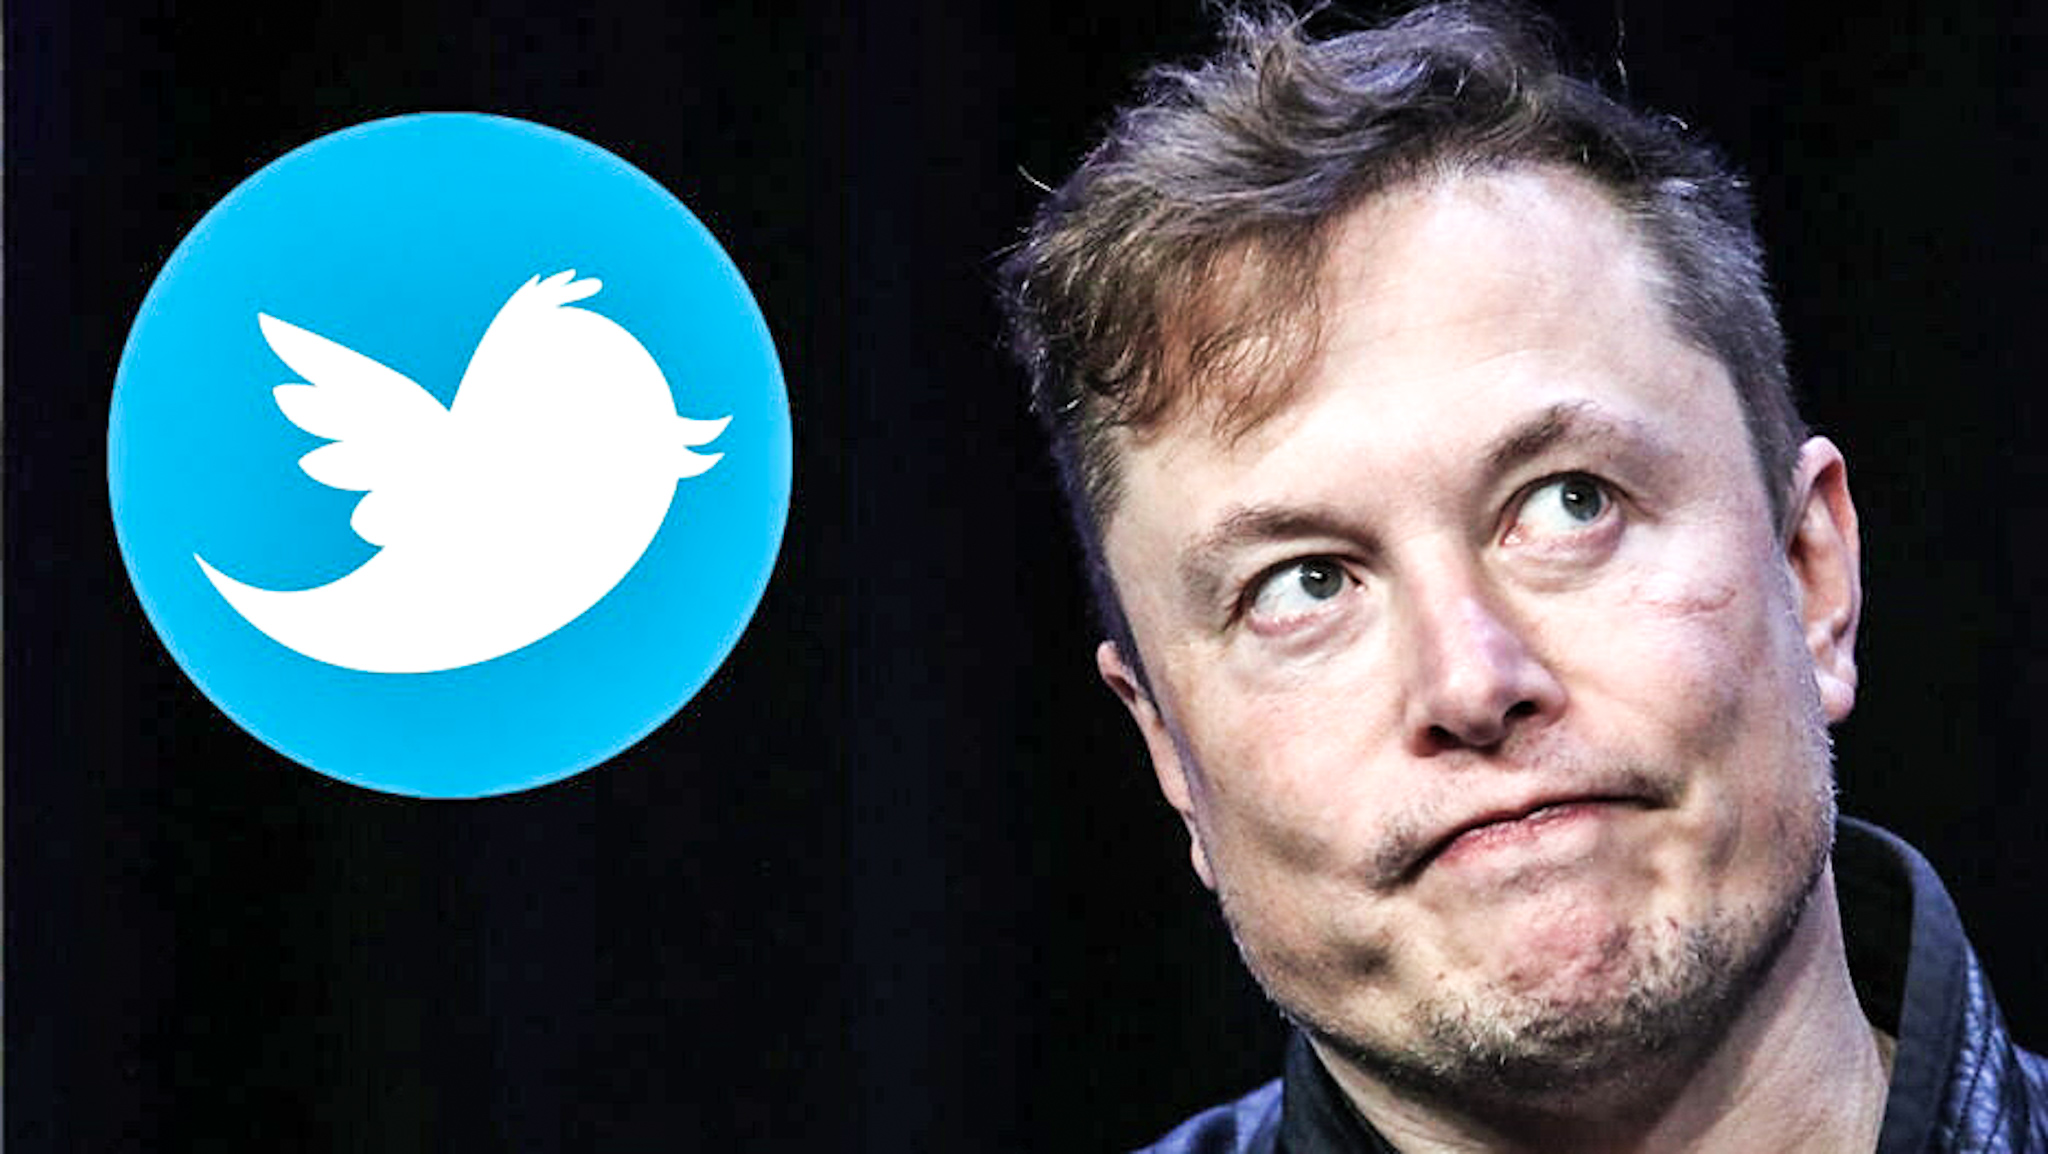 More Twitter workers flee after Musk's 'hardcore' ultimatum